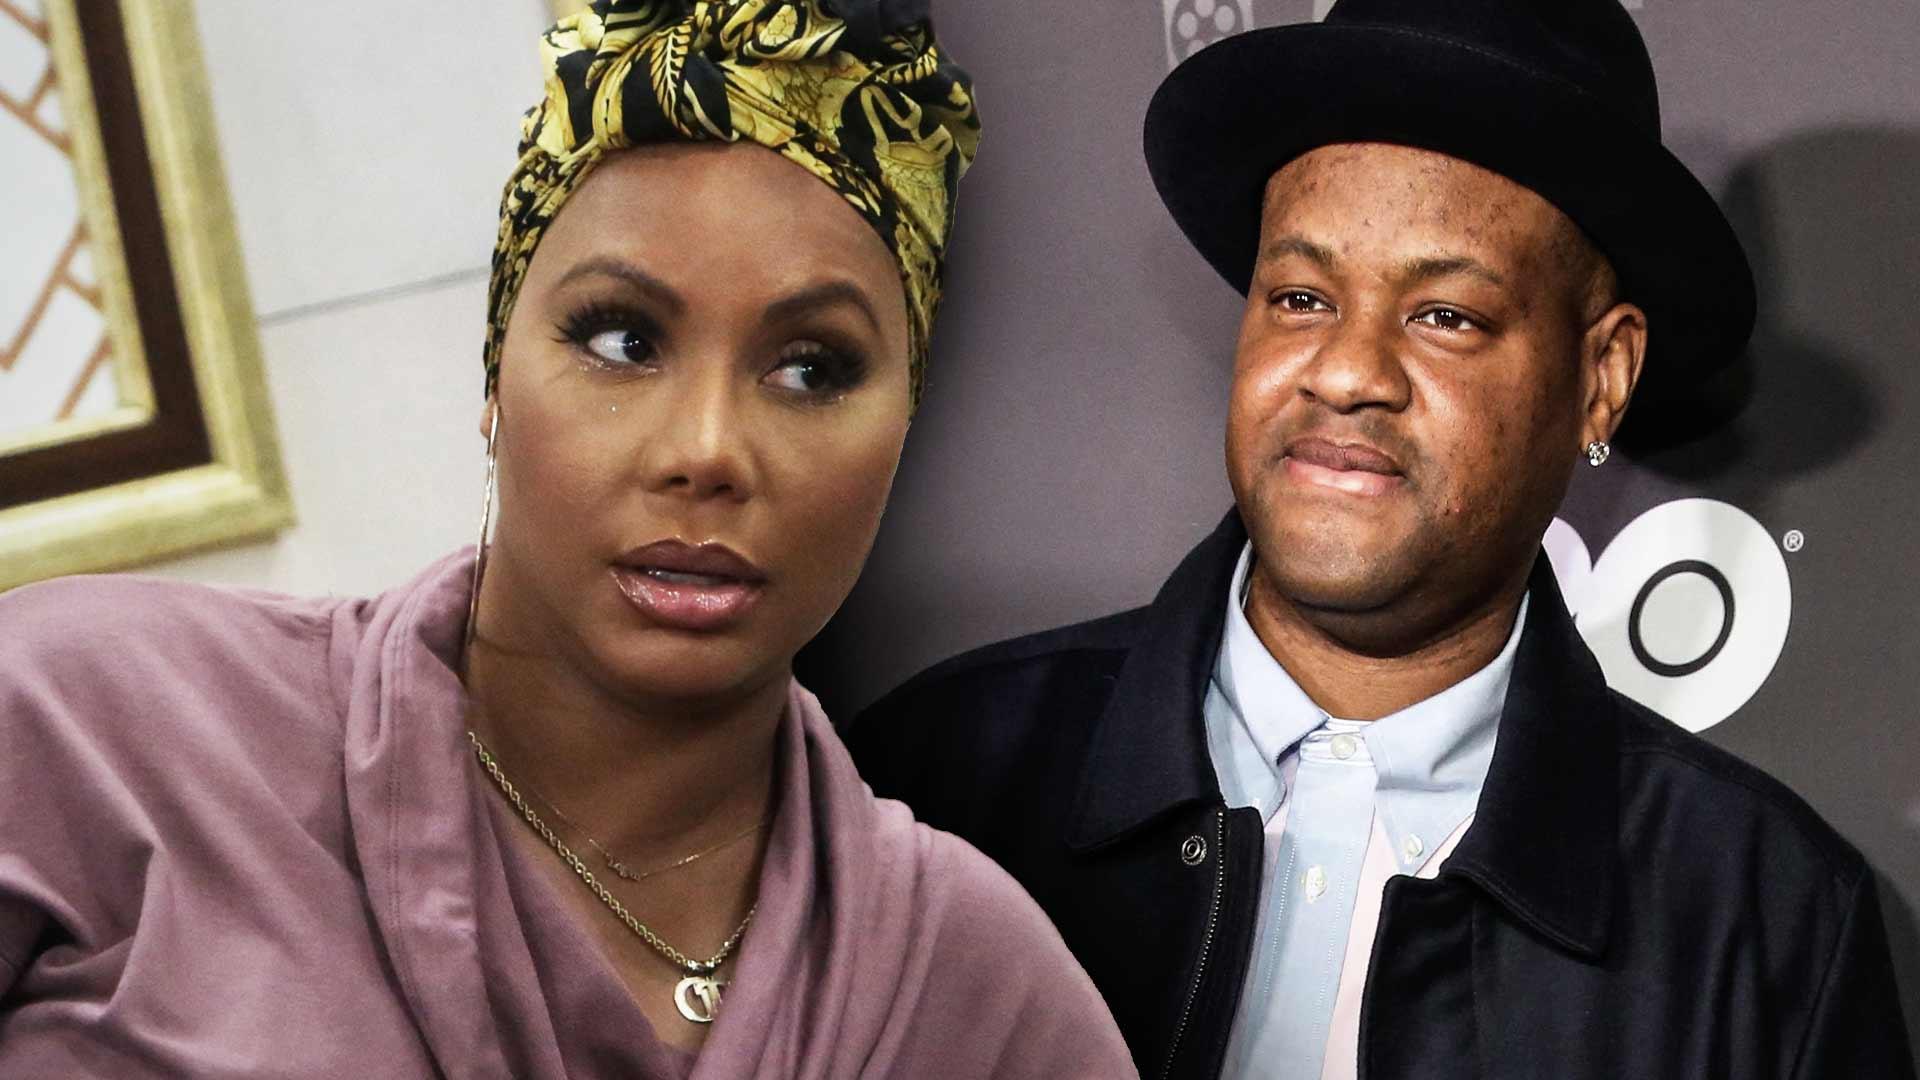 Tamar Braxton’s Estranged Husband Vince Herbert Accused of Owing $4 Million In Back Taxes